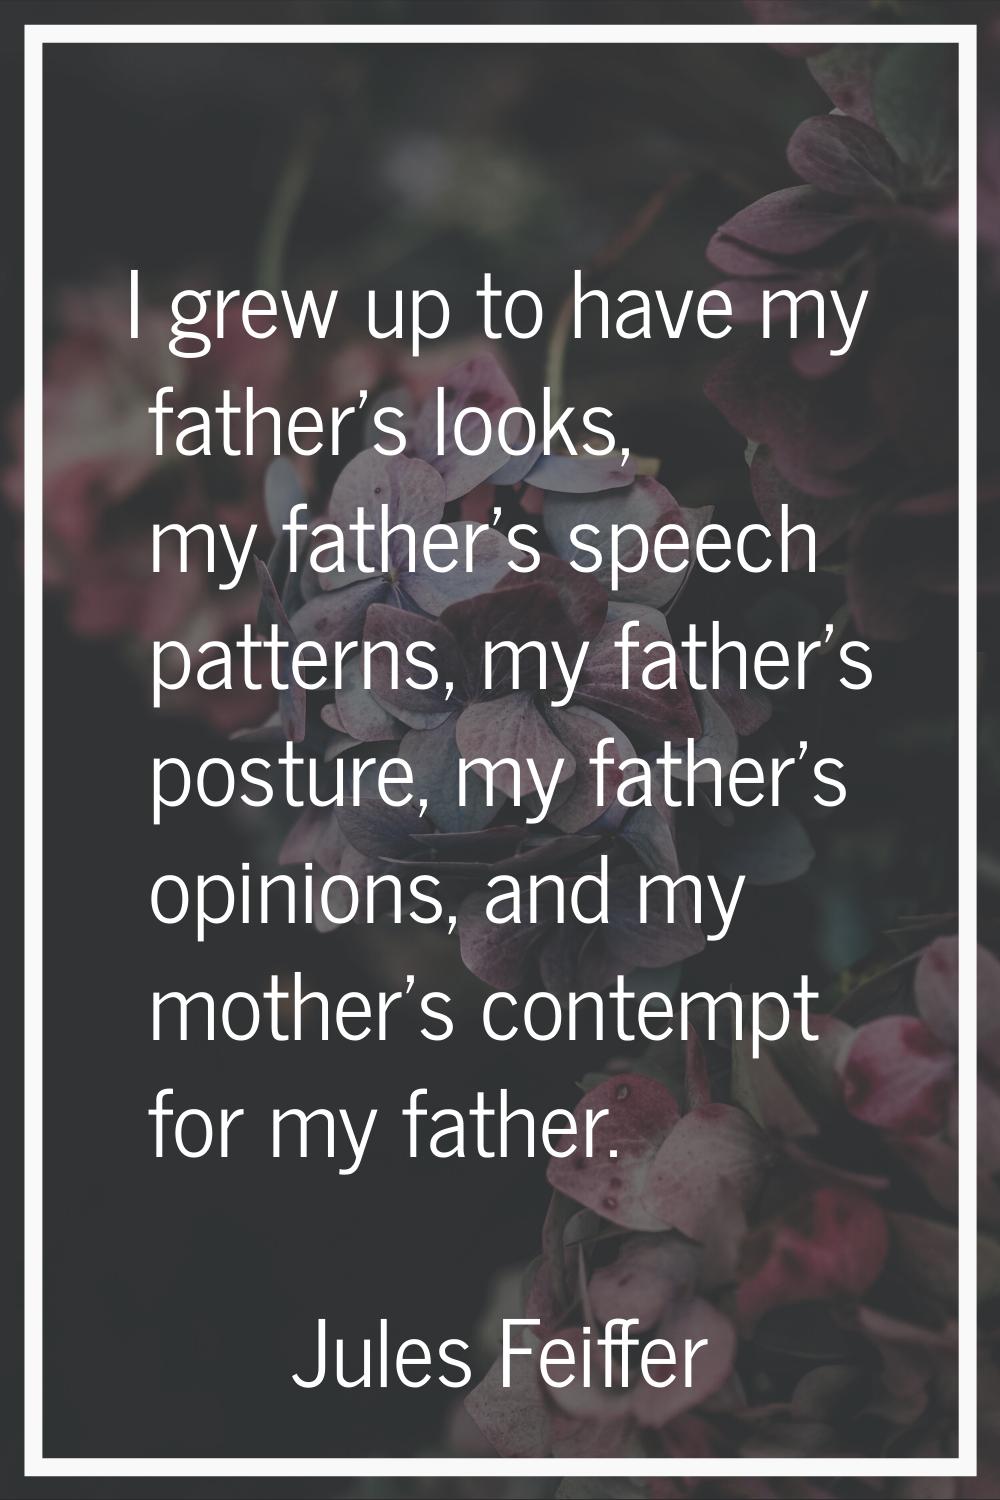 I grew up to have my father's looks, my father's speech patterns, my father's posture, my father's 